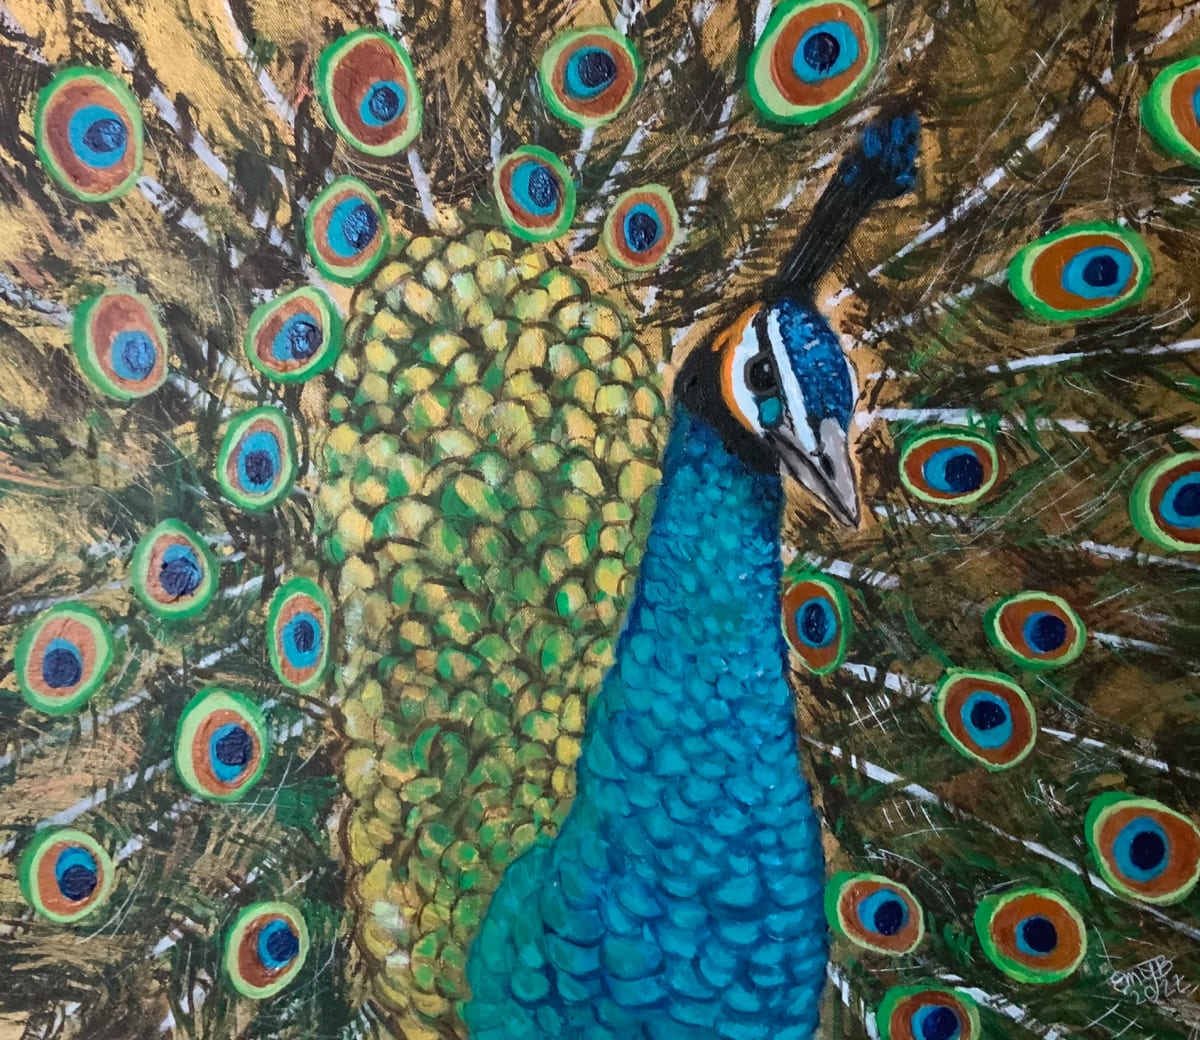 Peacock Proud by Eileen Backman  Image: Peacock Proud